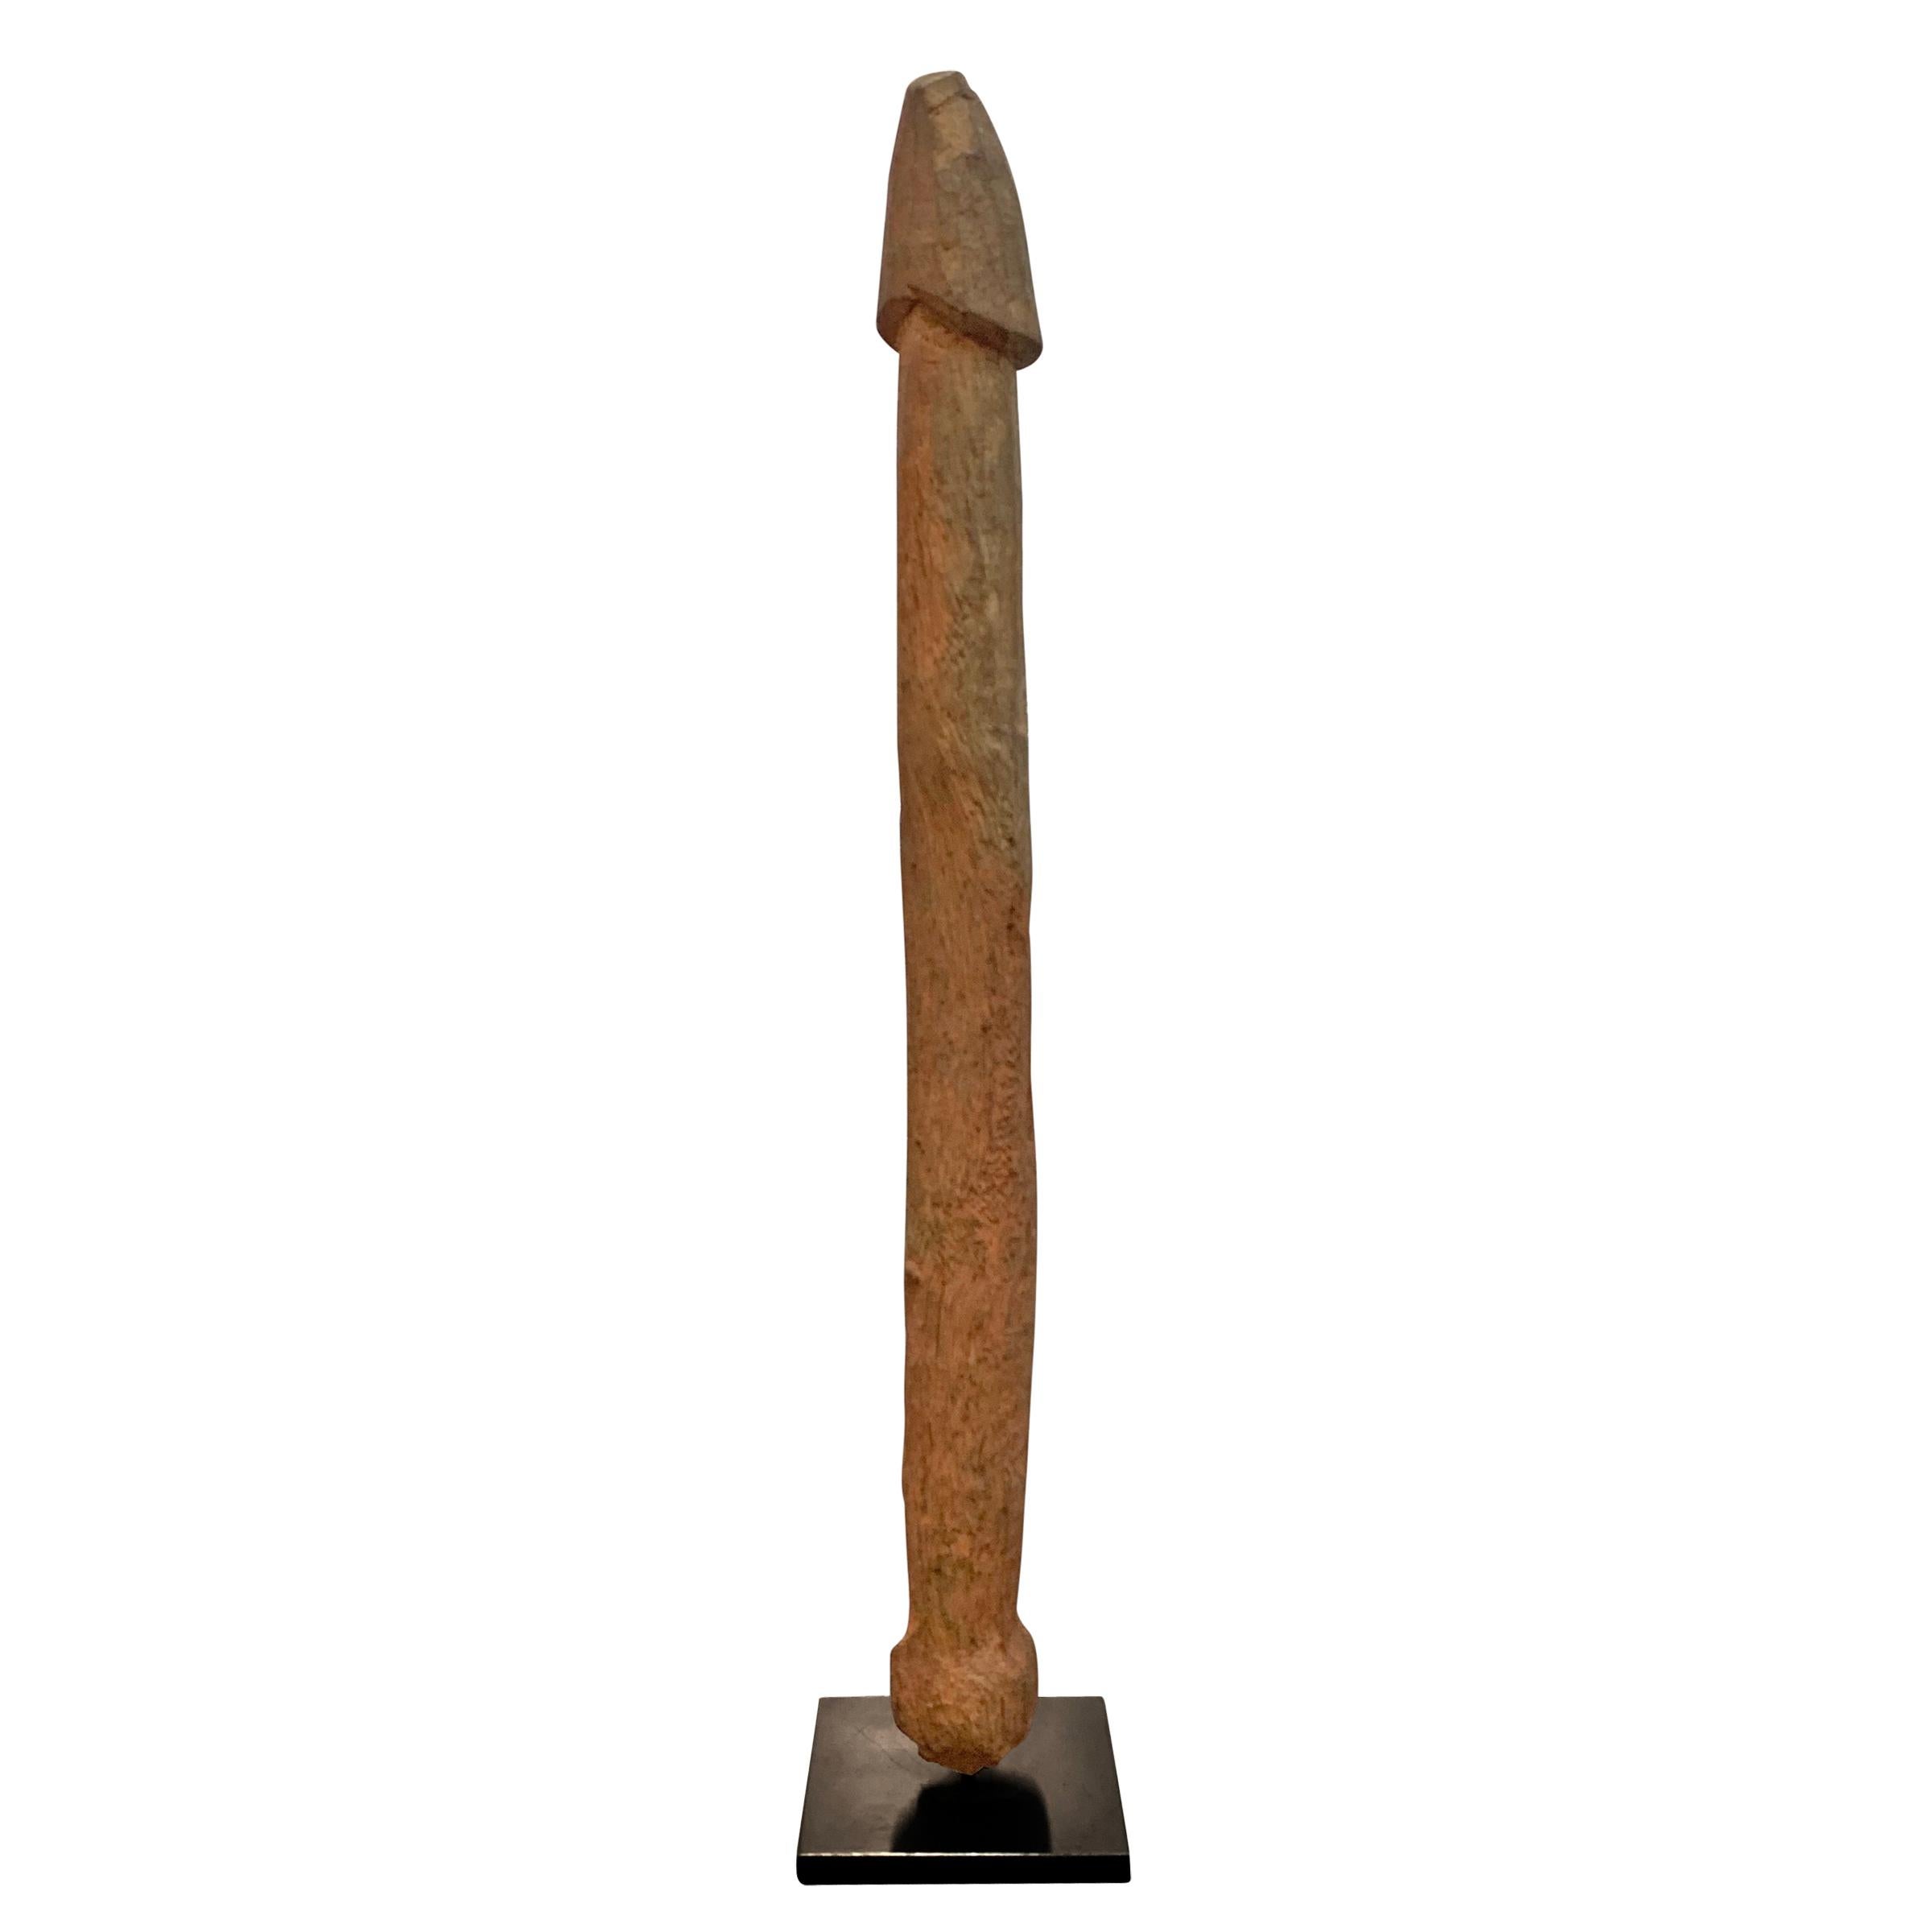 A wonderful early 20th century Fon wooden phallus fertility figure mounted on custom steel stand. Phallus figures like these were placed into the dirt of a farmer's field as an offering for a fertile and abundant crop. This piece shows lots of wear